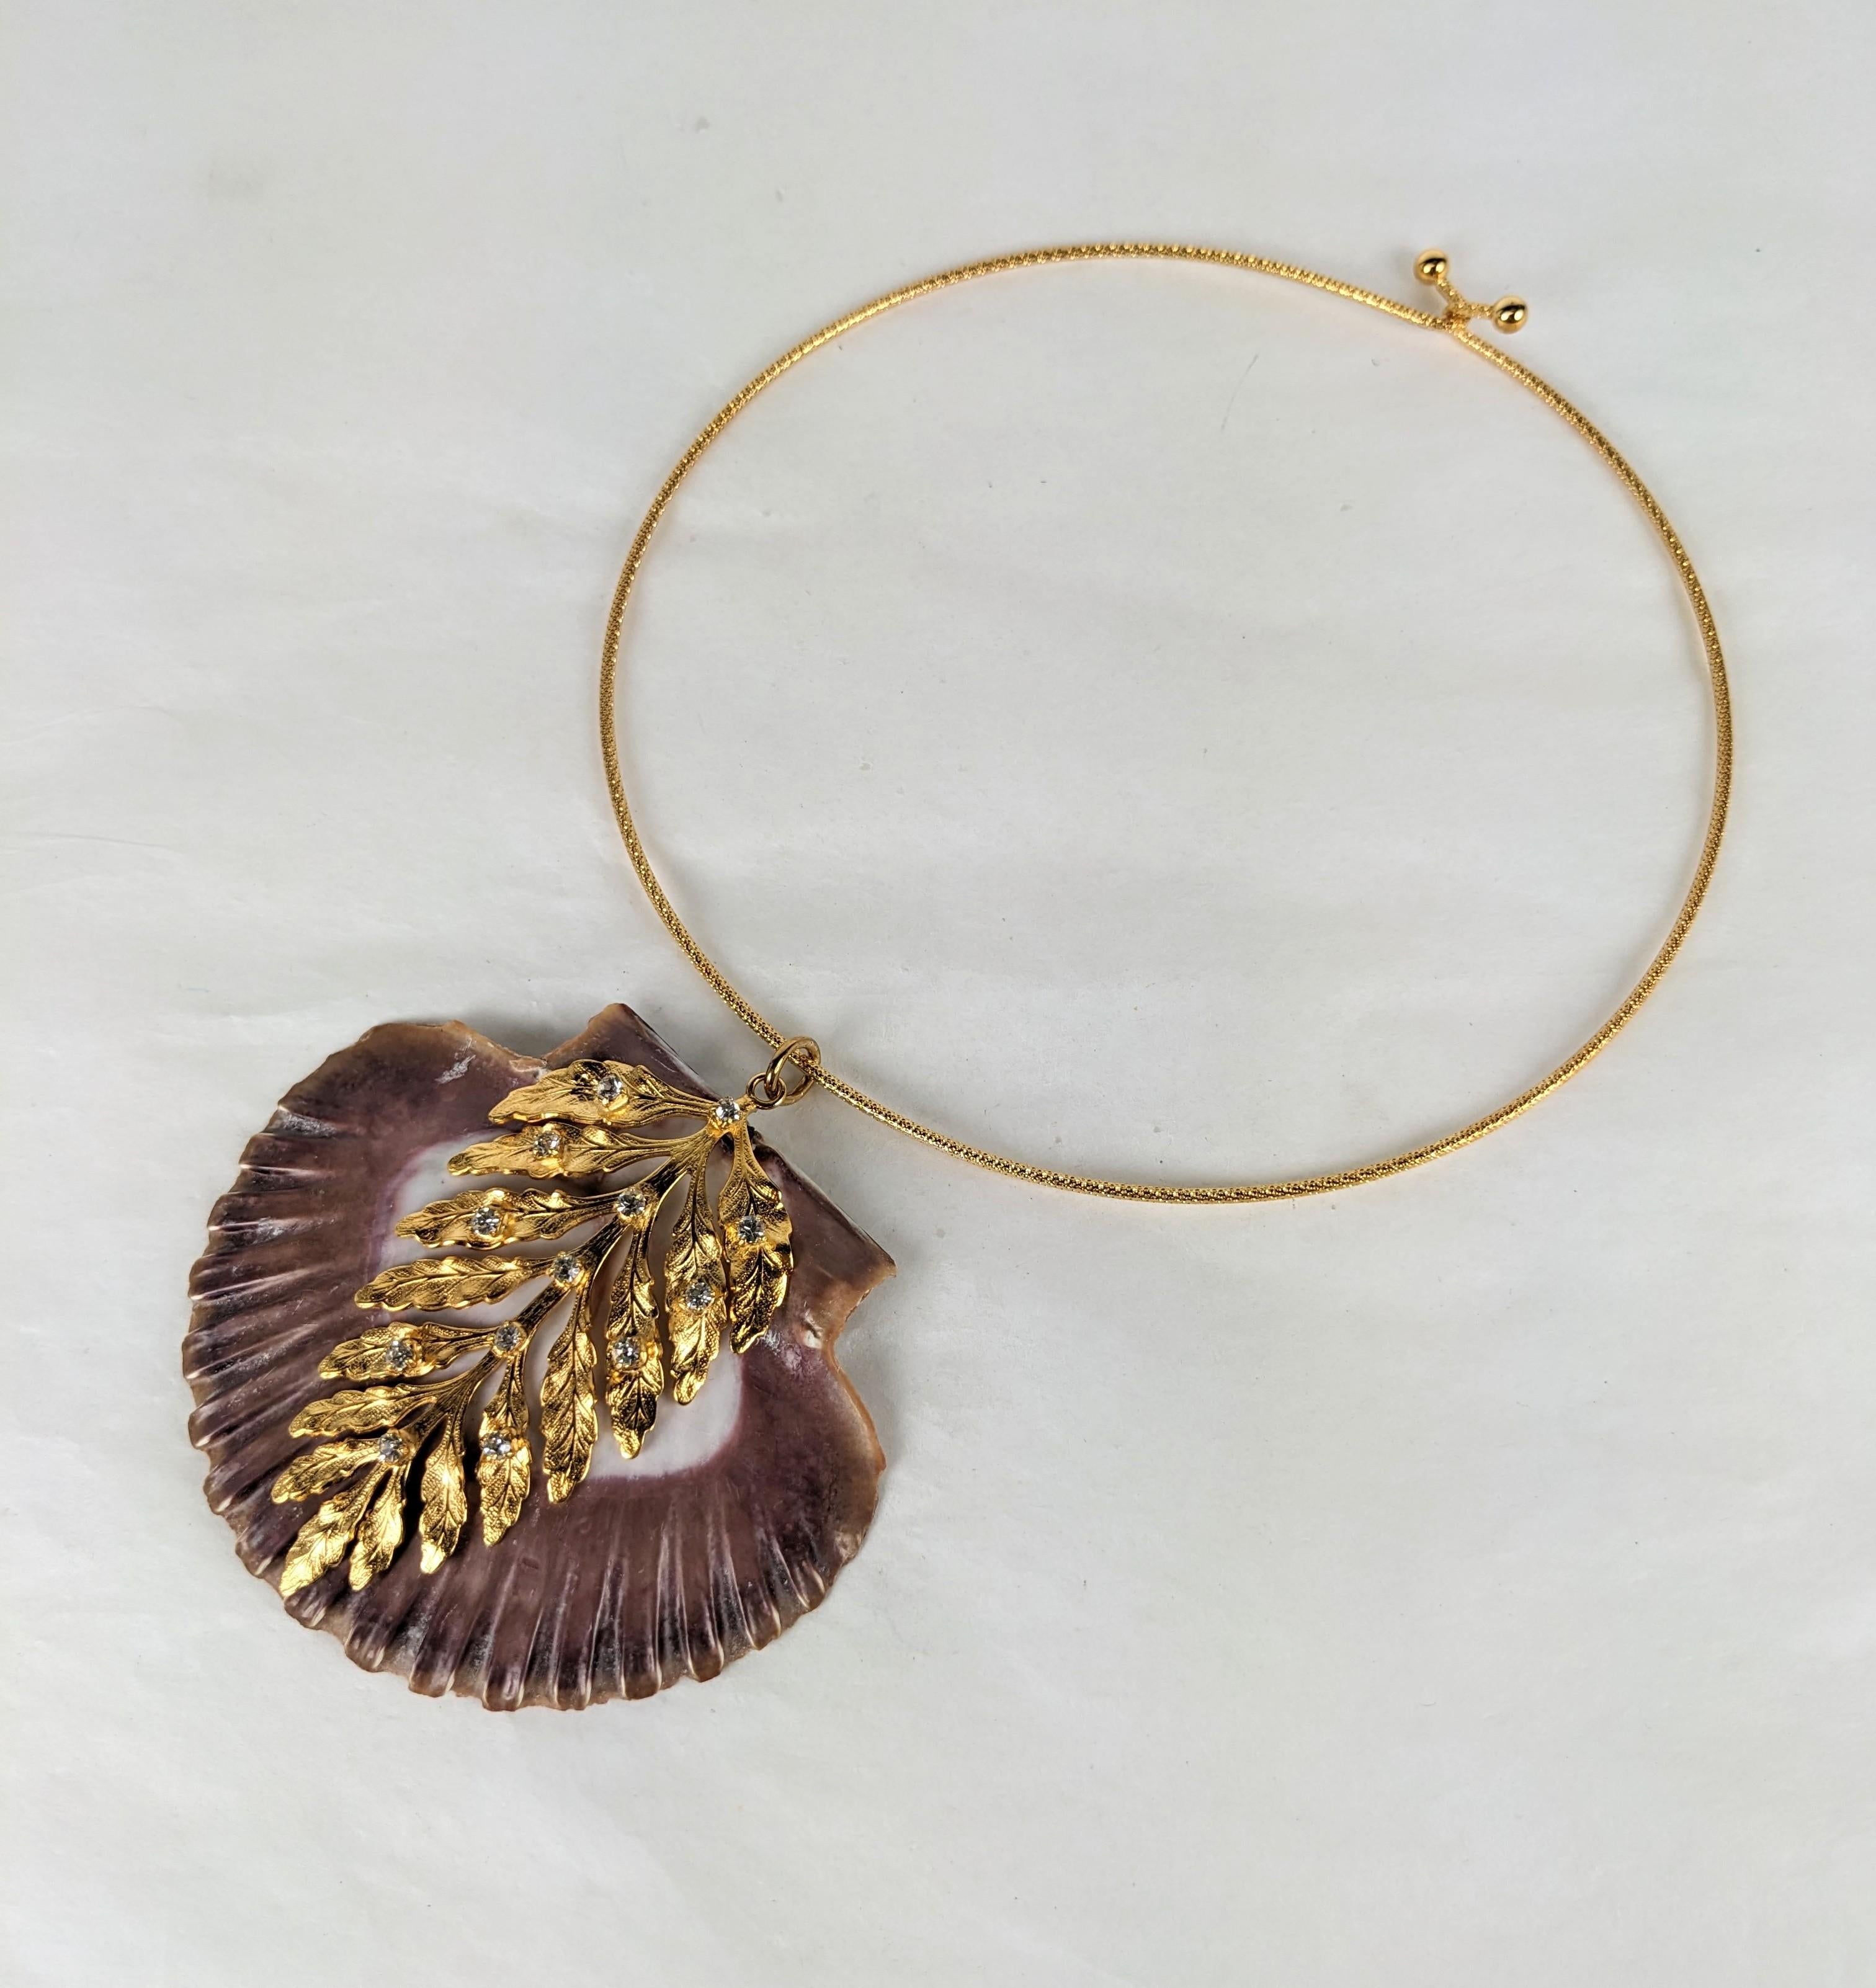 MWLC Purple Lion Paw Scallop Shell pendant necklace from MWLC. The natural shell decorated with a gilt plate bronze fern frond, decorated with prong set crystal rhinestones, made in the Parisian studios of MWLC. Textured matte necklet. Purple Pecten